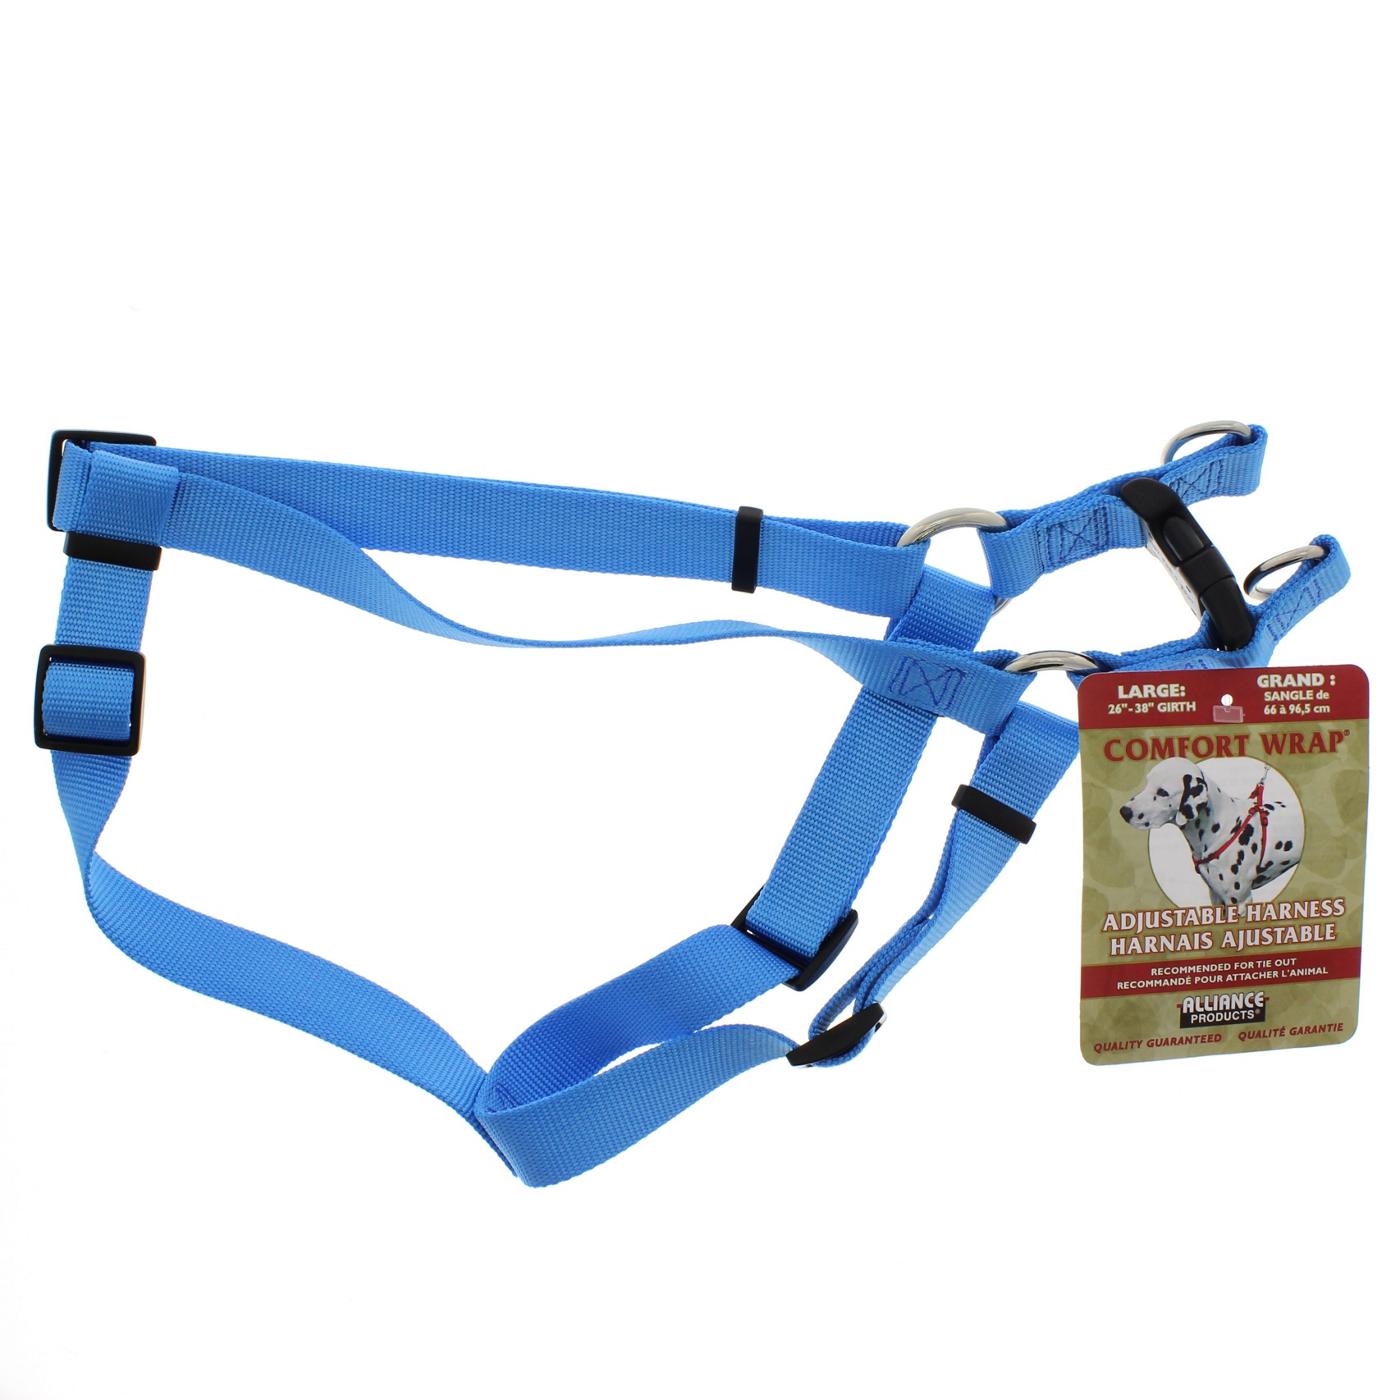 Alliance Comfort Wrap Nylon Large Harness Assorted Colors; image 2 of 2